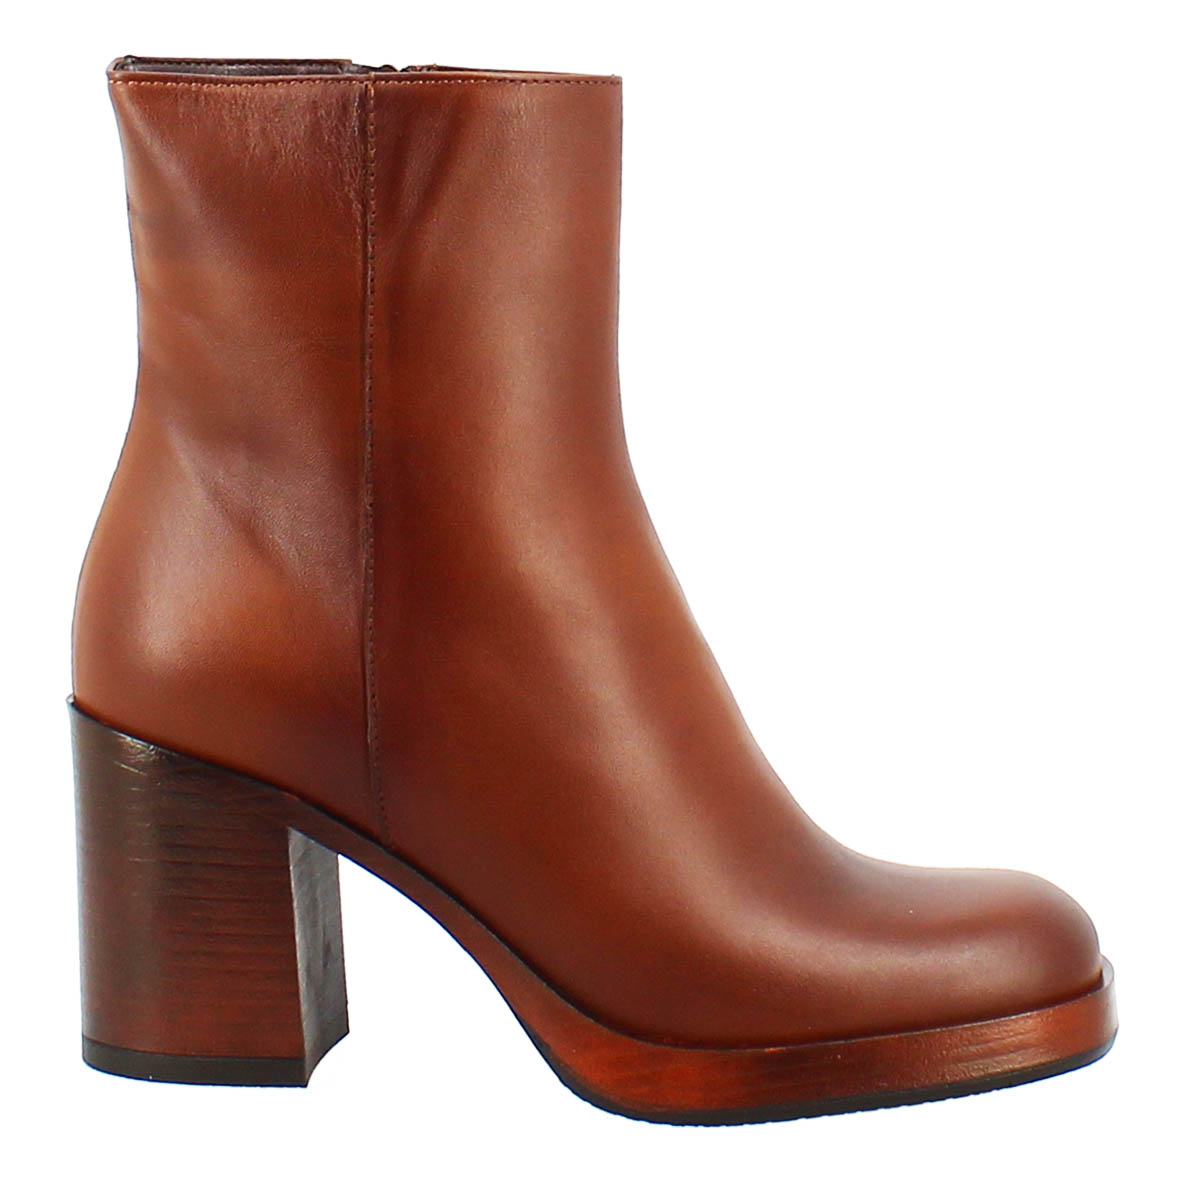 Women's ankle boots in brown leather with square heel 